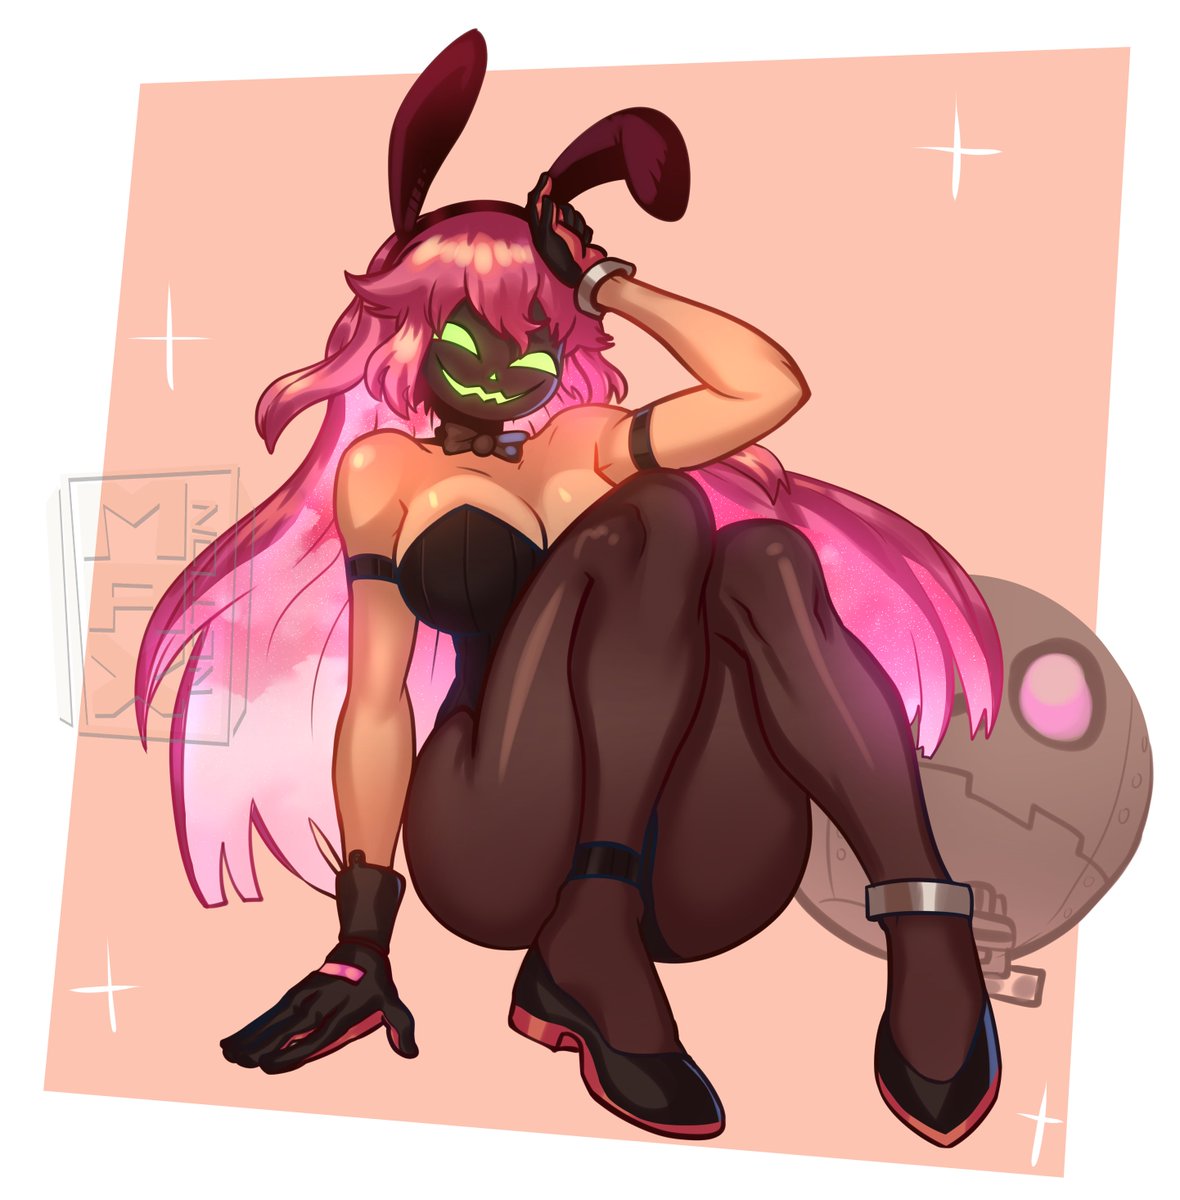 Jack-o valentine bunny suit
my friends challenged me to do that
#JACKOSWEEP #GGST